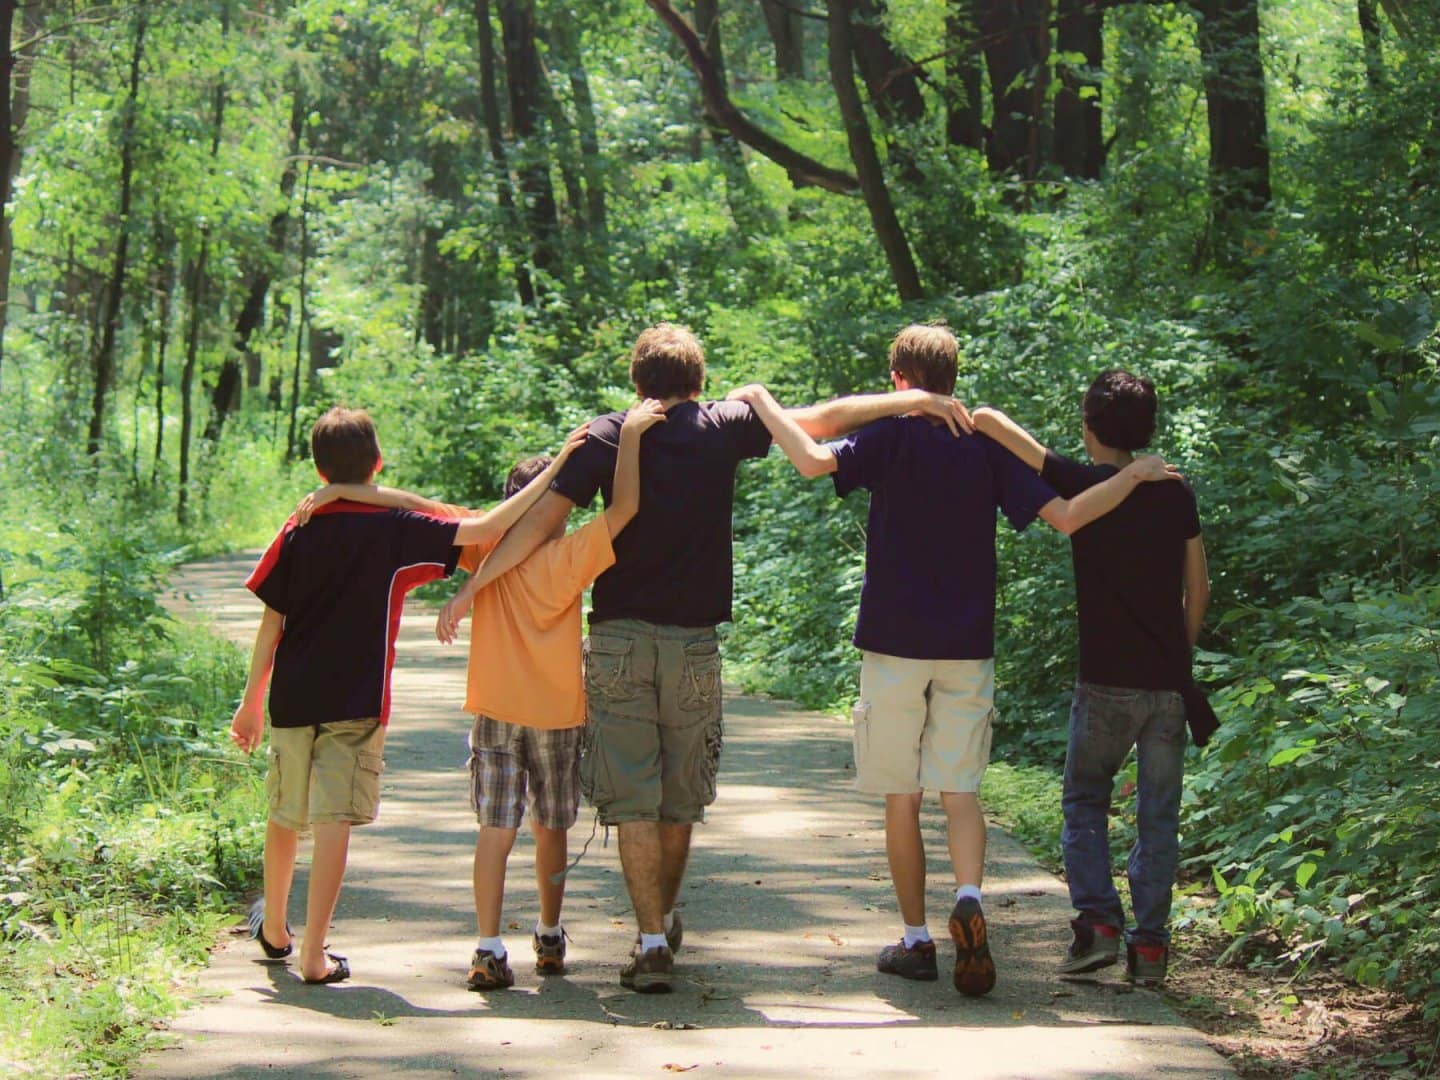 Five boys of varying height, age, and race walk with their arms over each others shoulders down a trail in a forest.